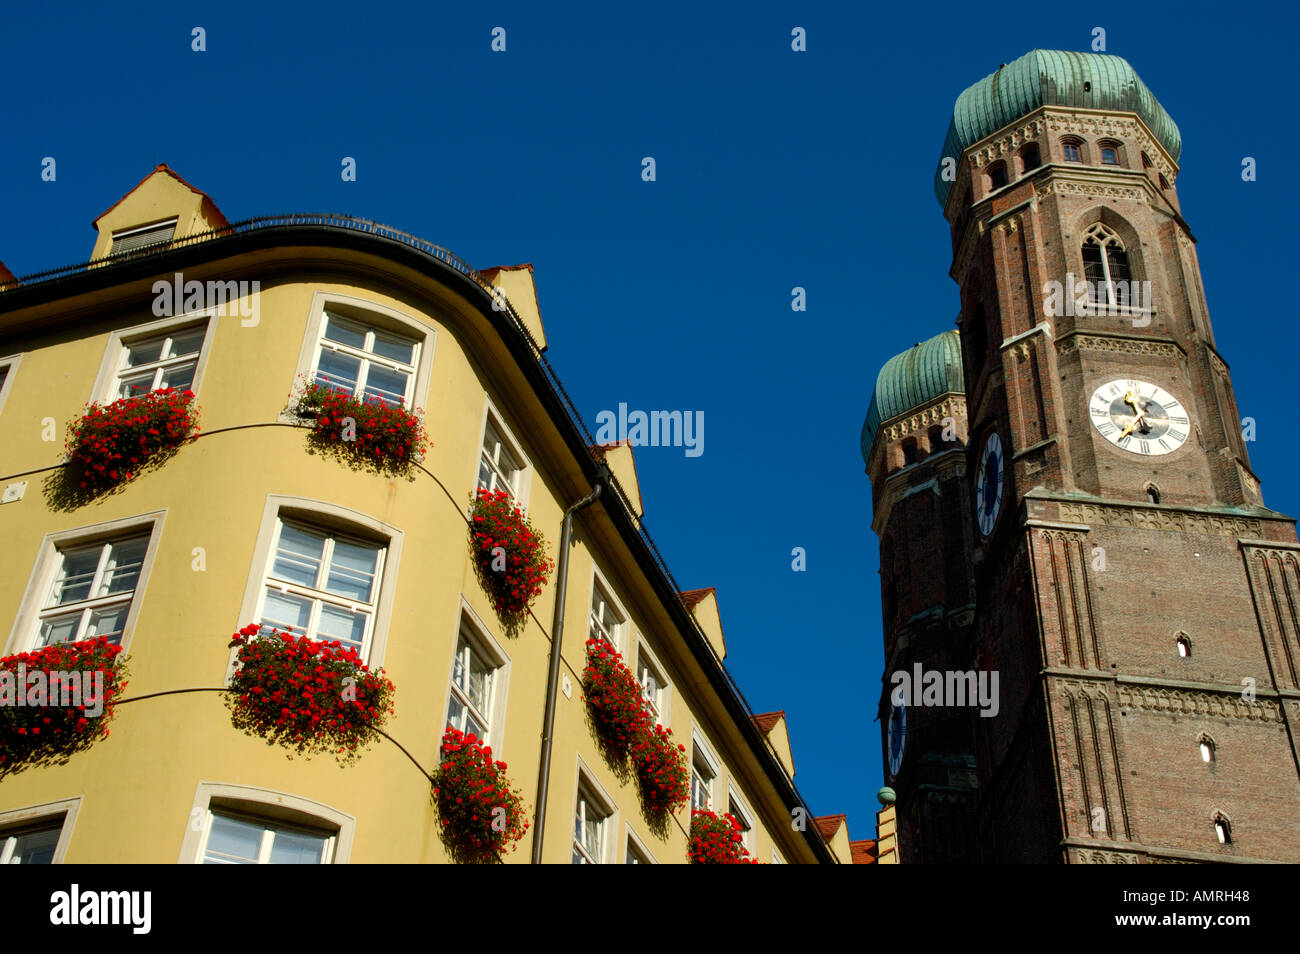 Towers of the church Frauenkirche with a residental house Munich Bavaria Germany Stock Photo